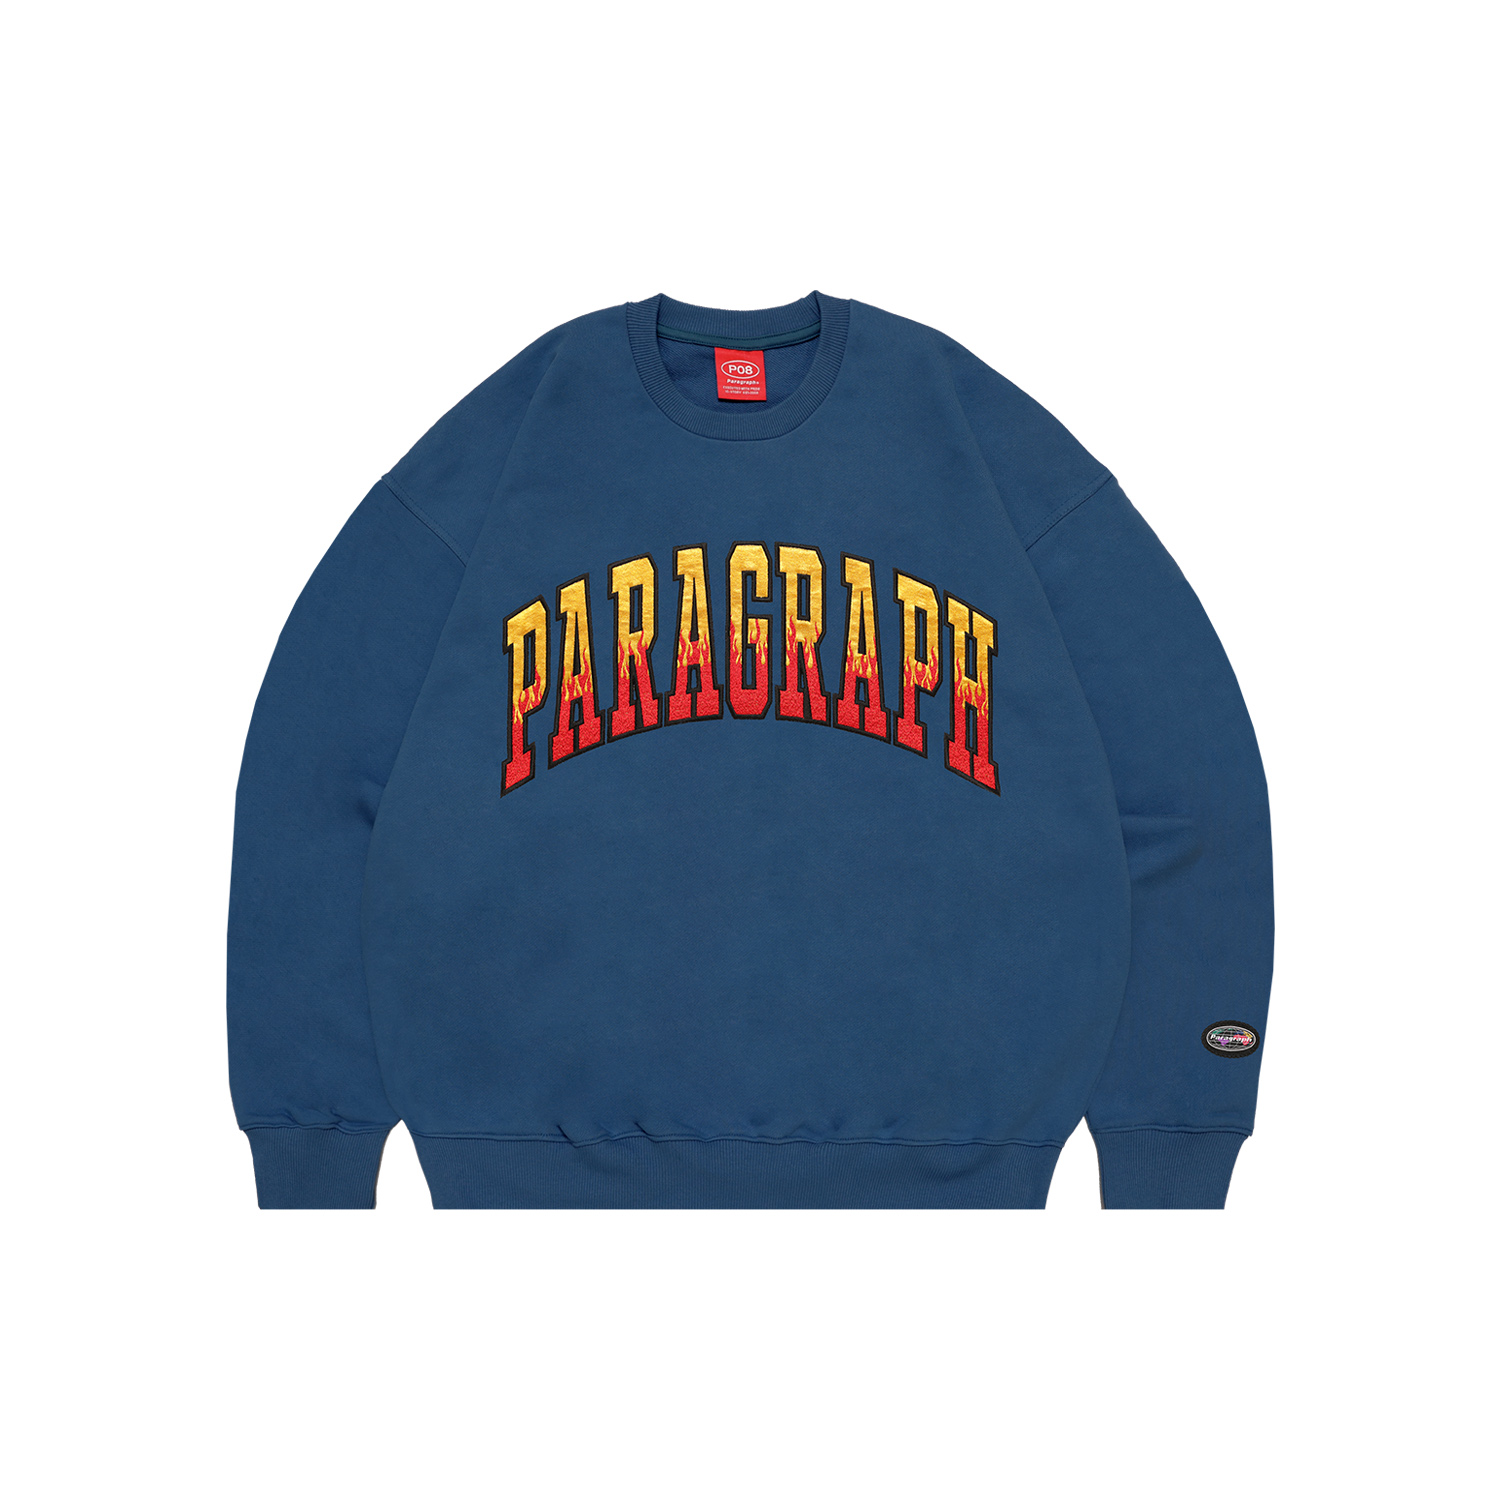 PARAGRAPH FLAME CREW9/25 출고